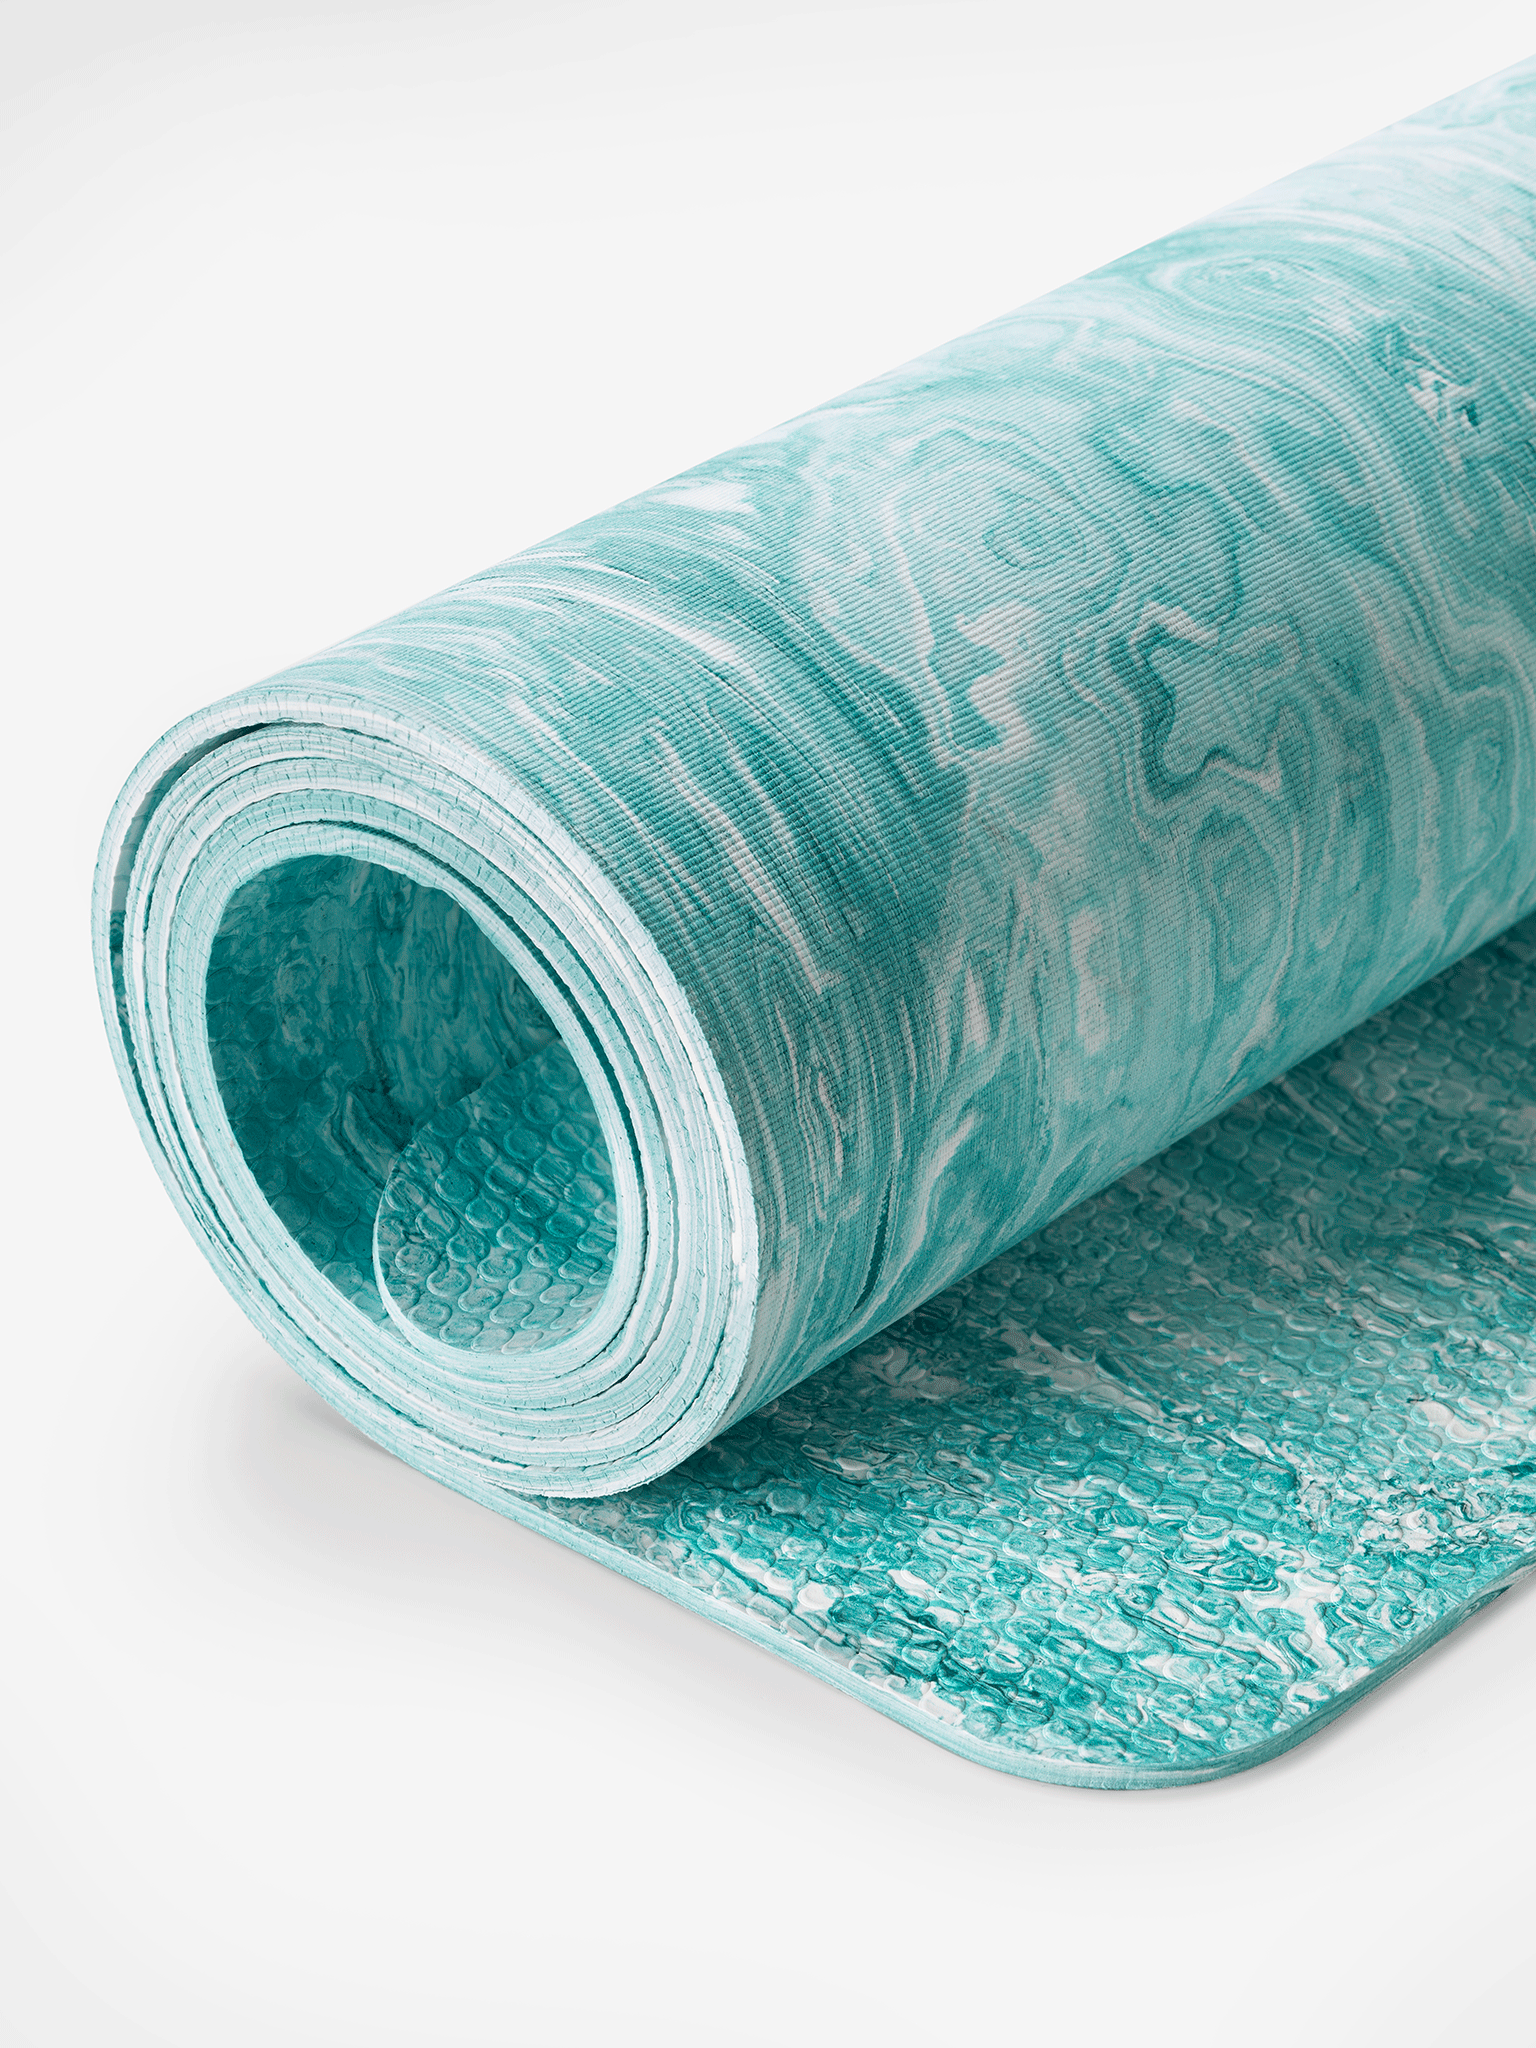 Textured blue yoga mat partially rolled up on a white background showing non-slip surface detail, side view.